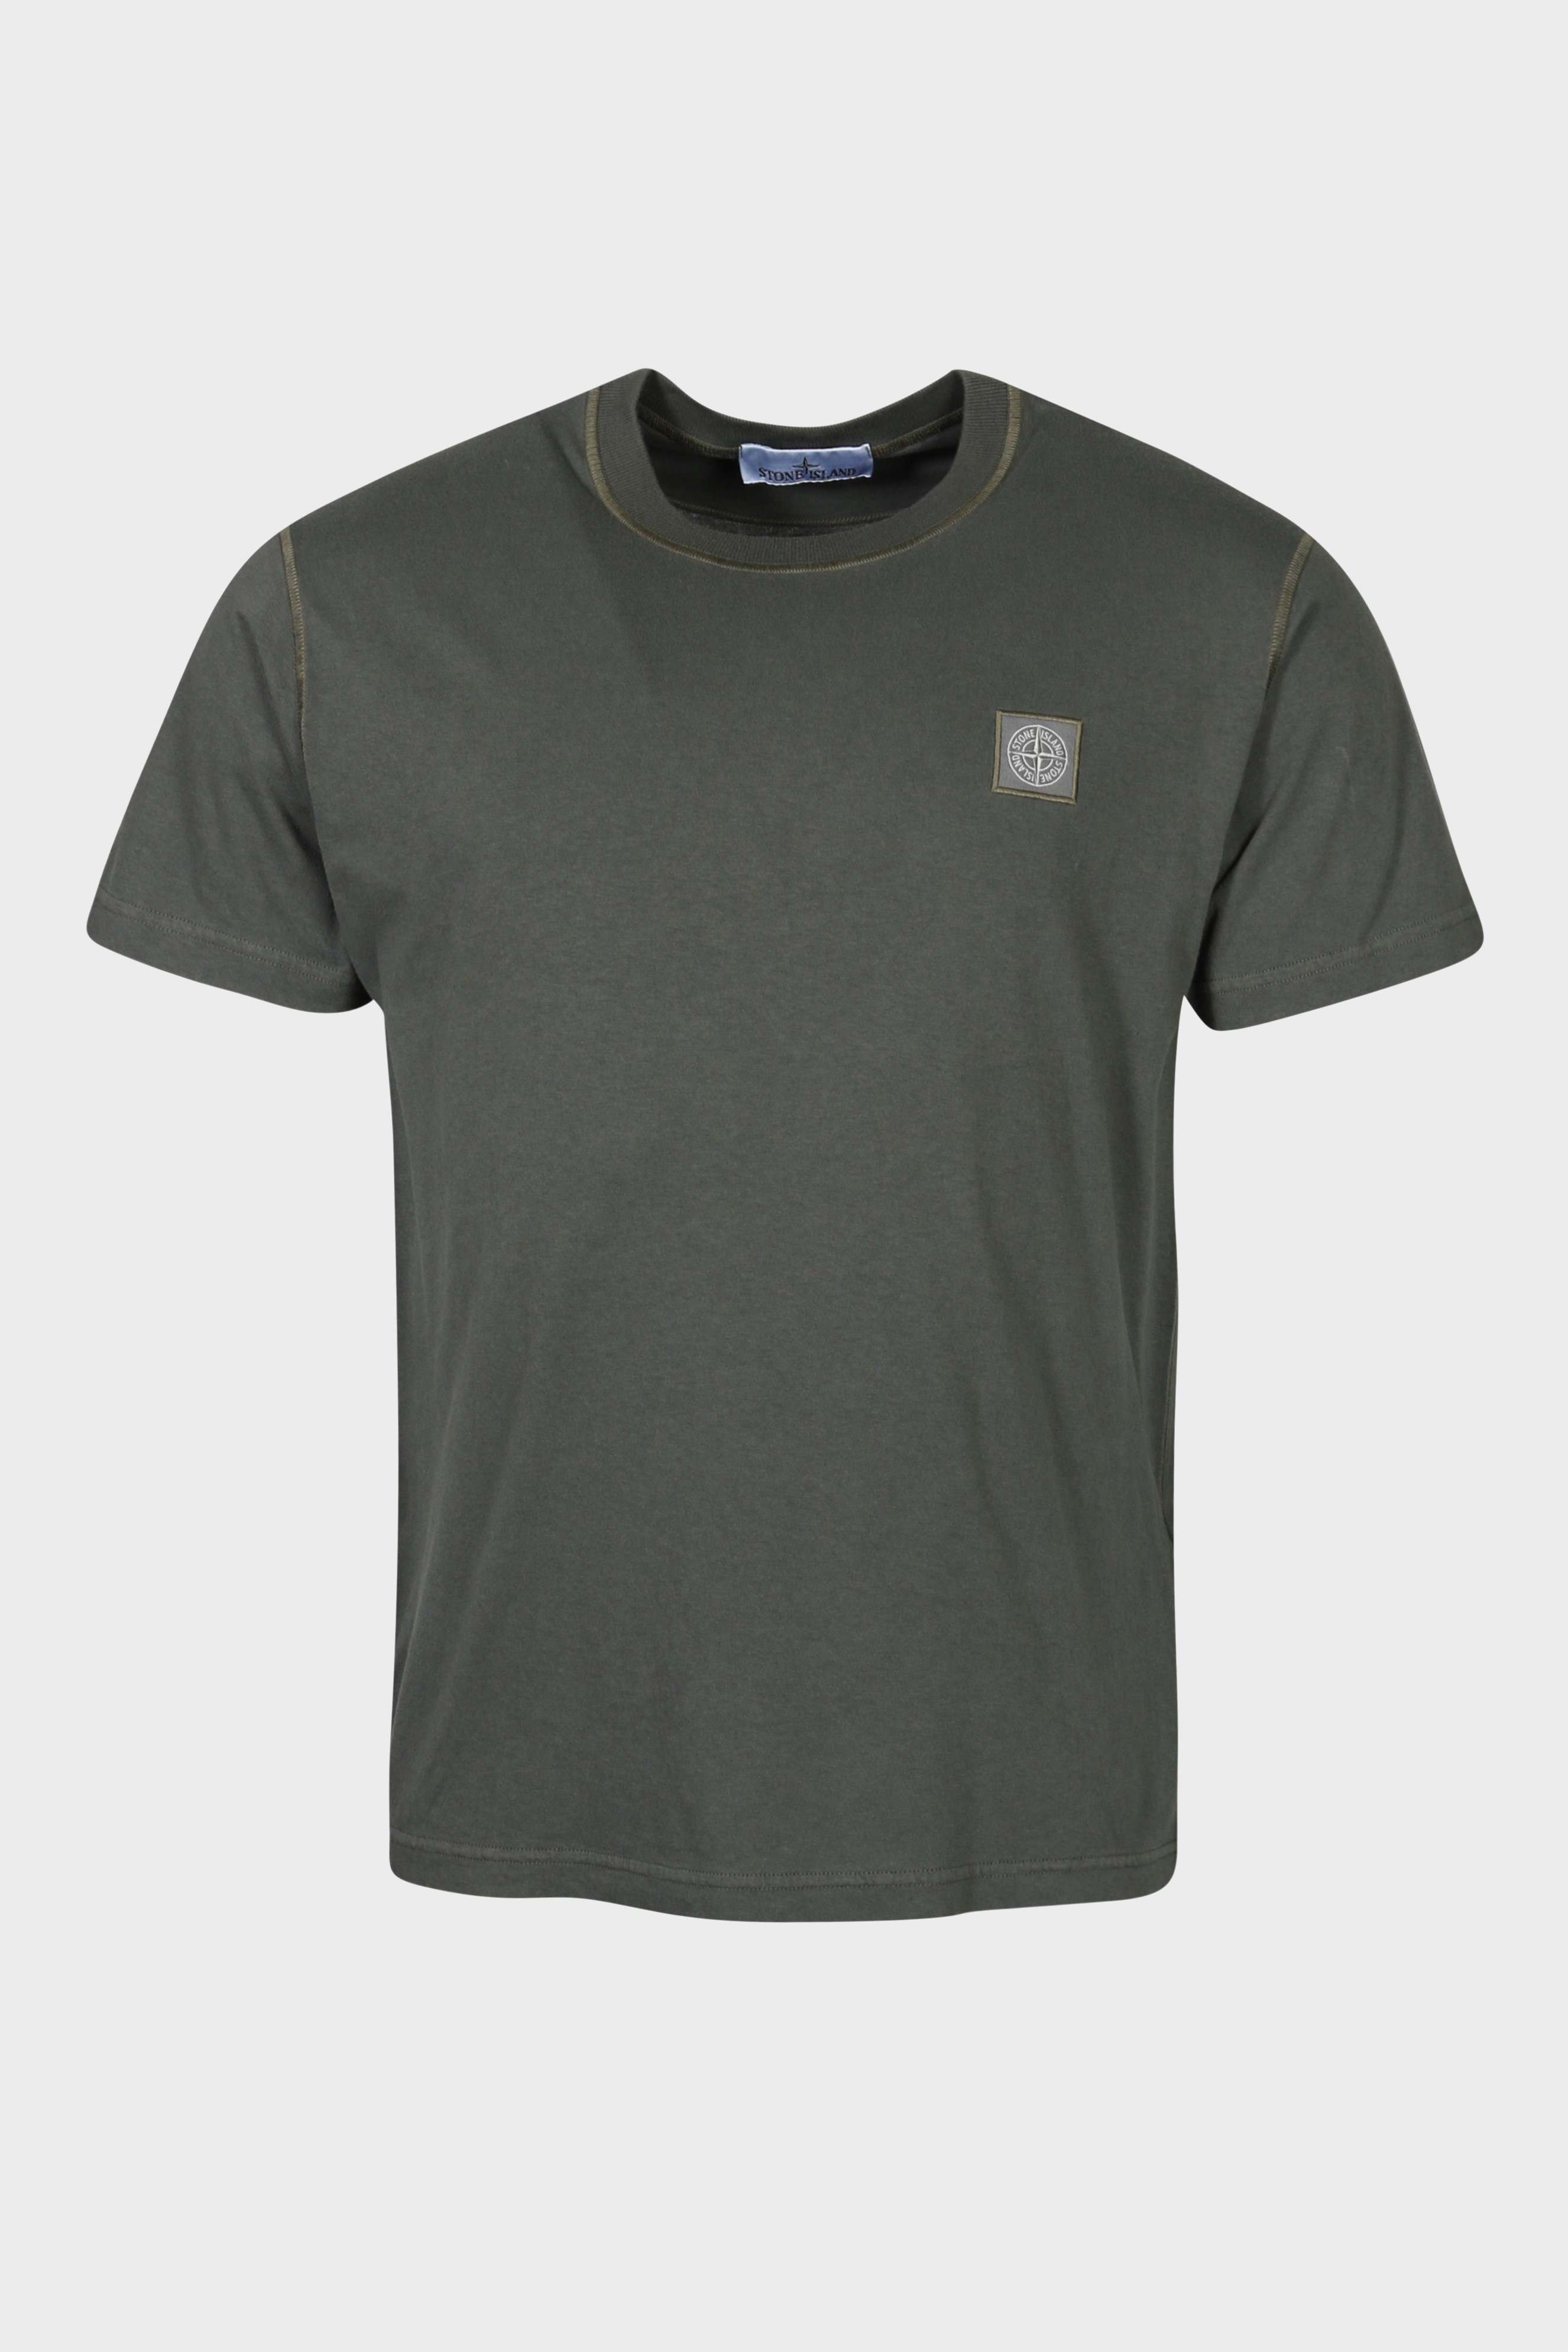 STONE ISLAND T-Shirt in Washed Green 2XL